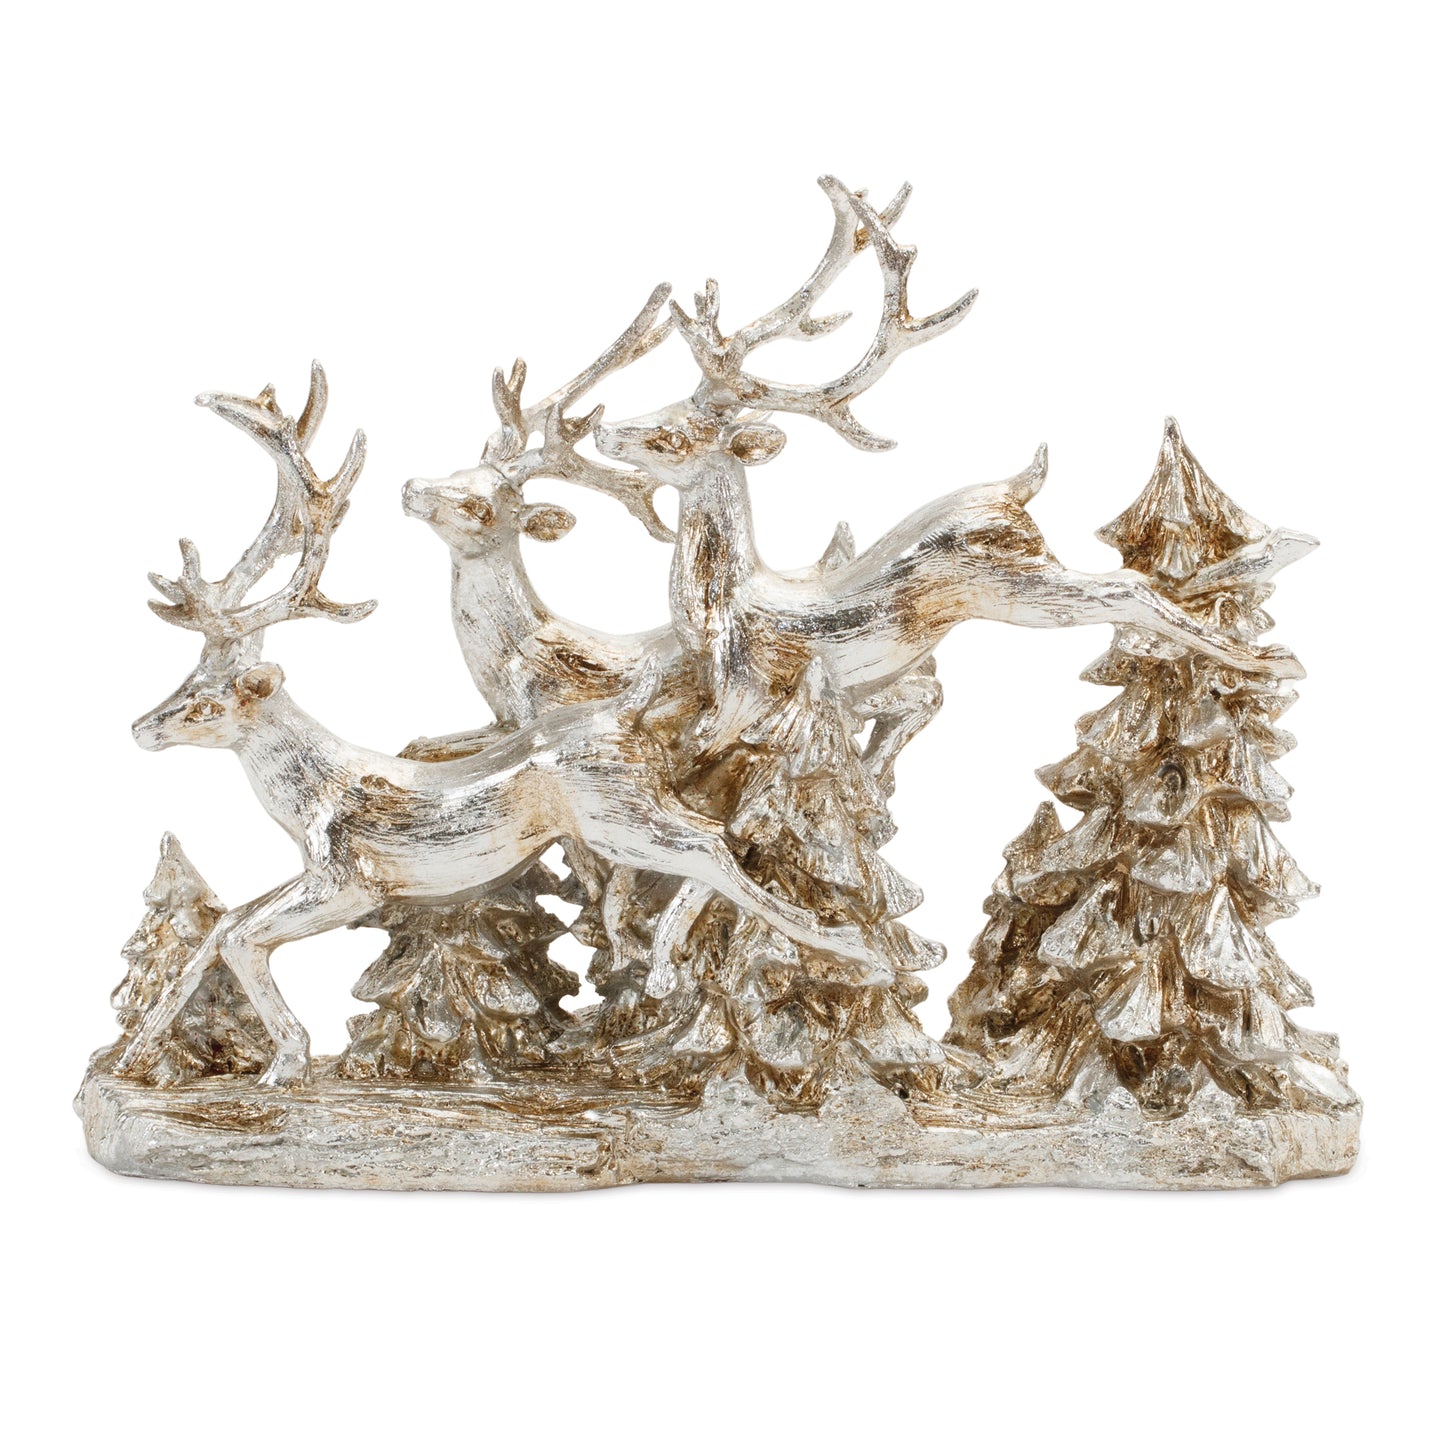 15.5"L x 12"H Resin Golden Forest Deer and Trees Figurine